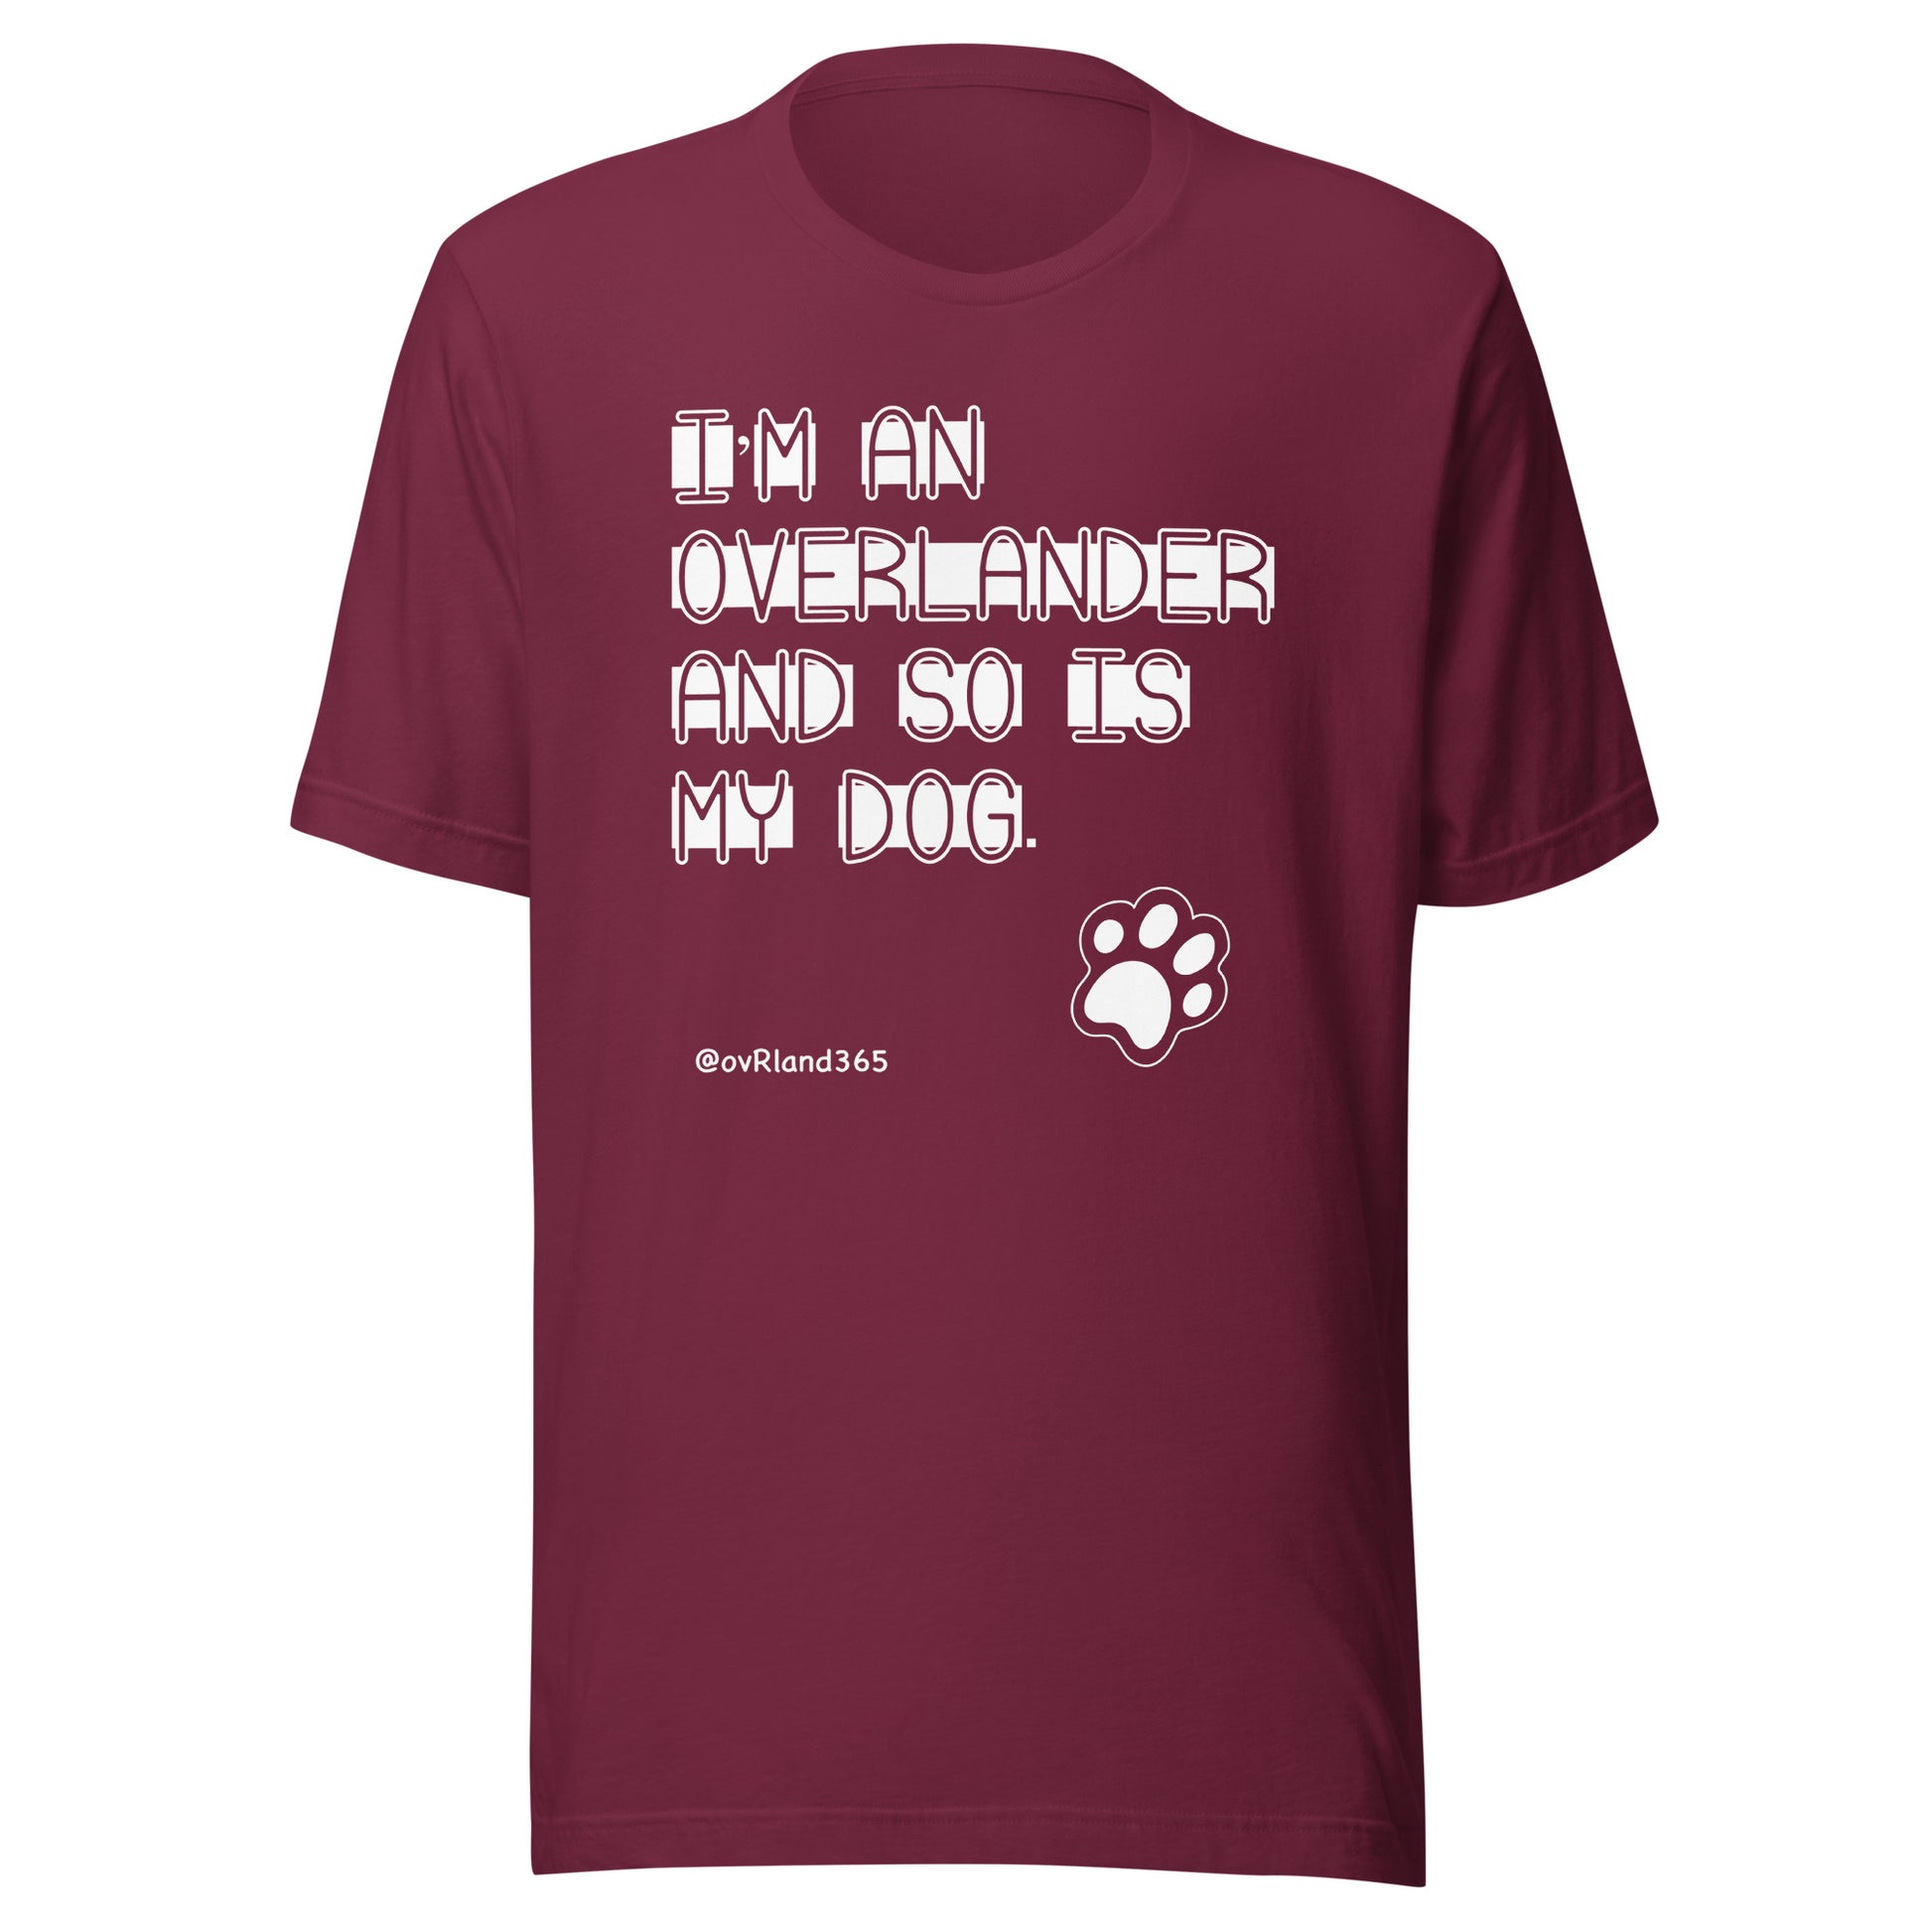 I'm an overlander and so is my dog. Maroon t-shirt with a paw print. overland365.com